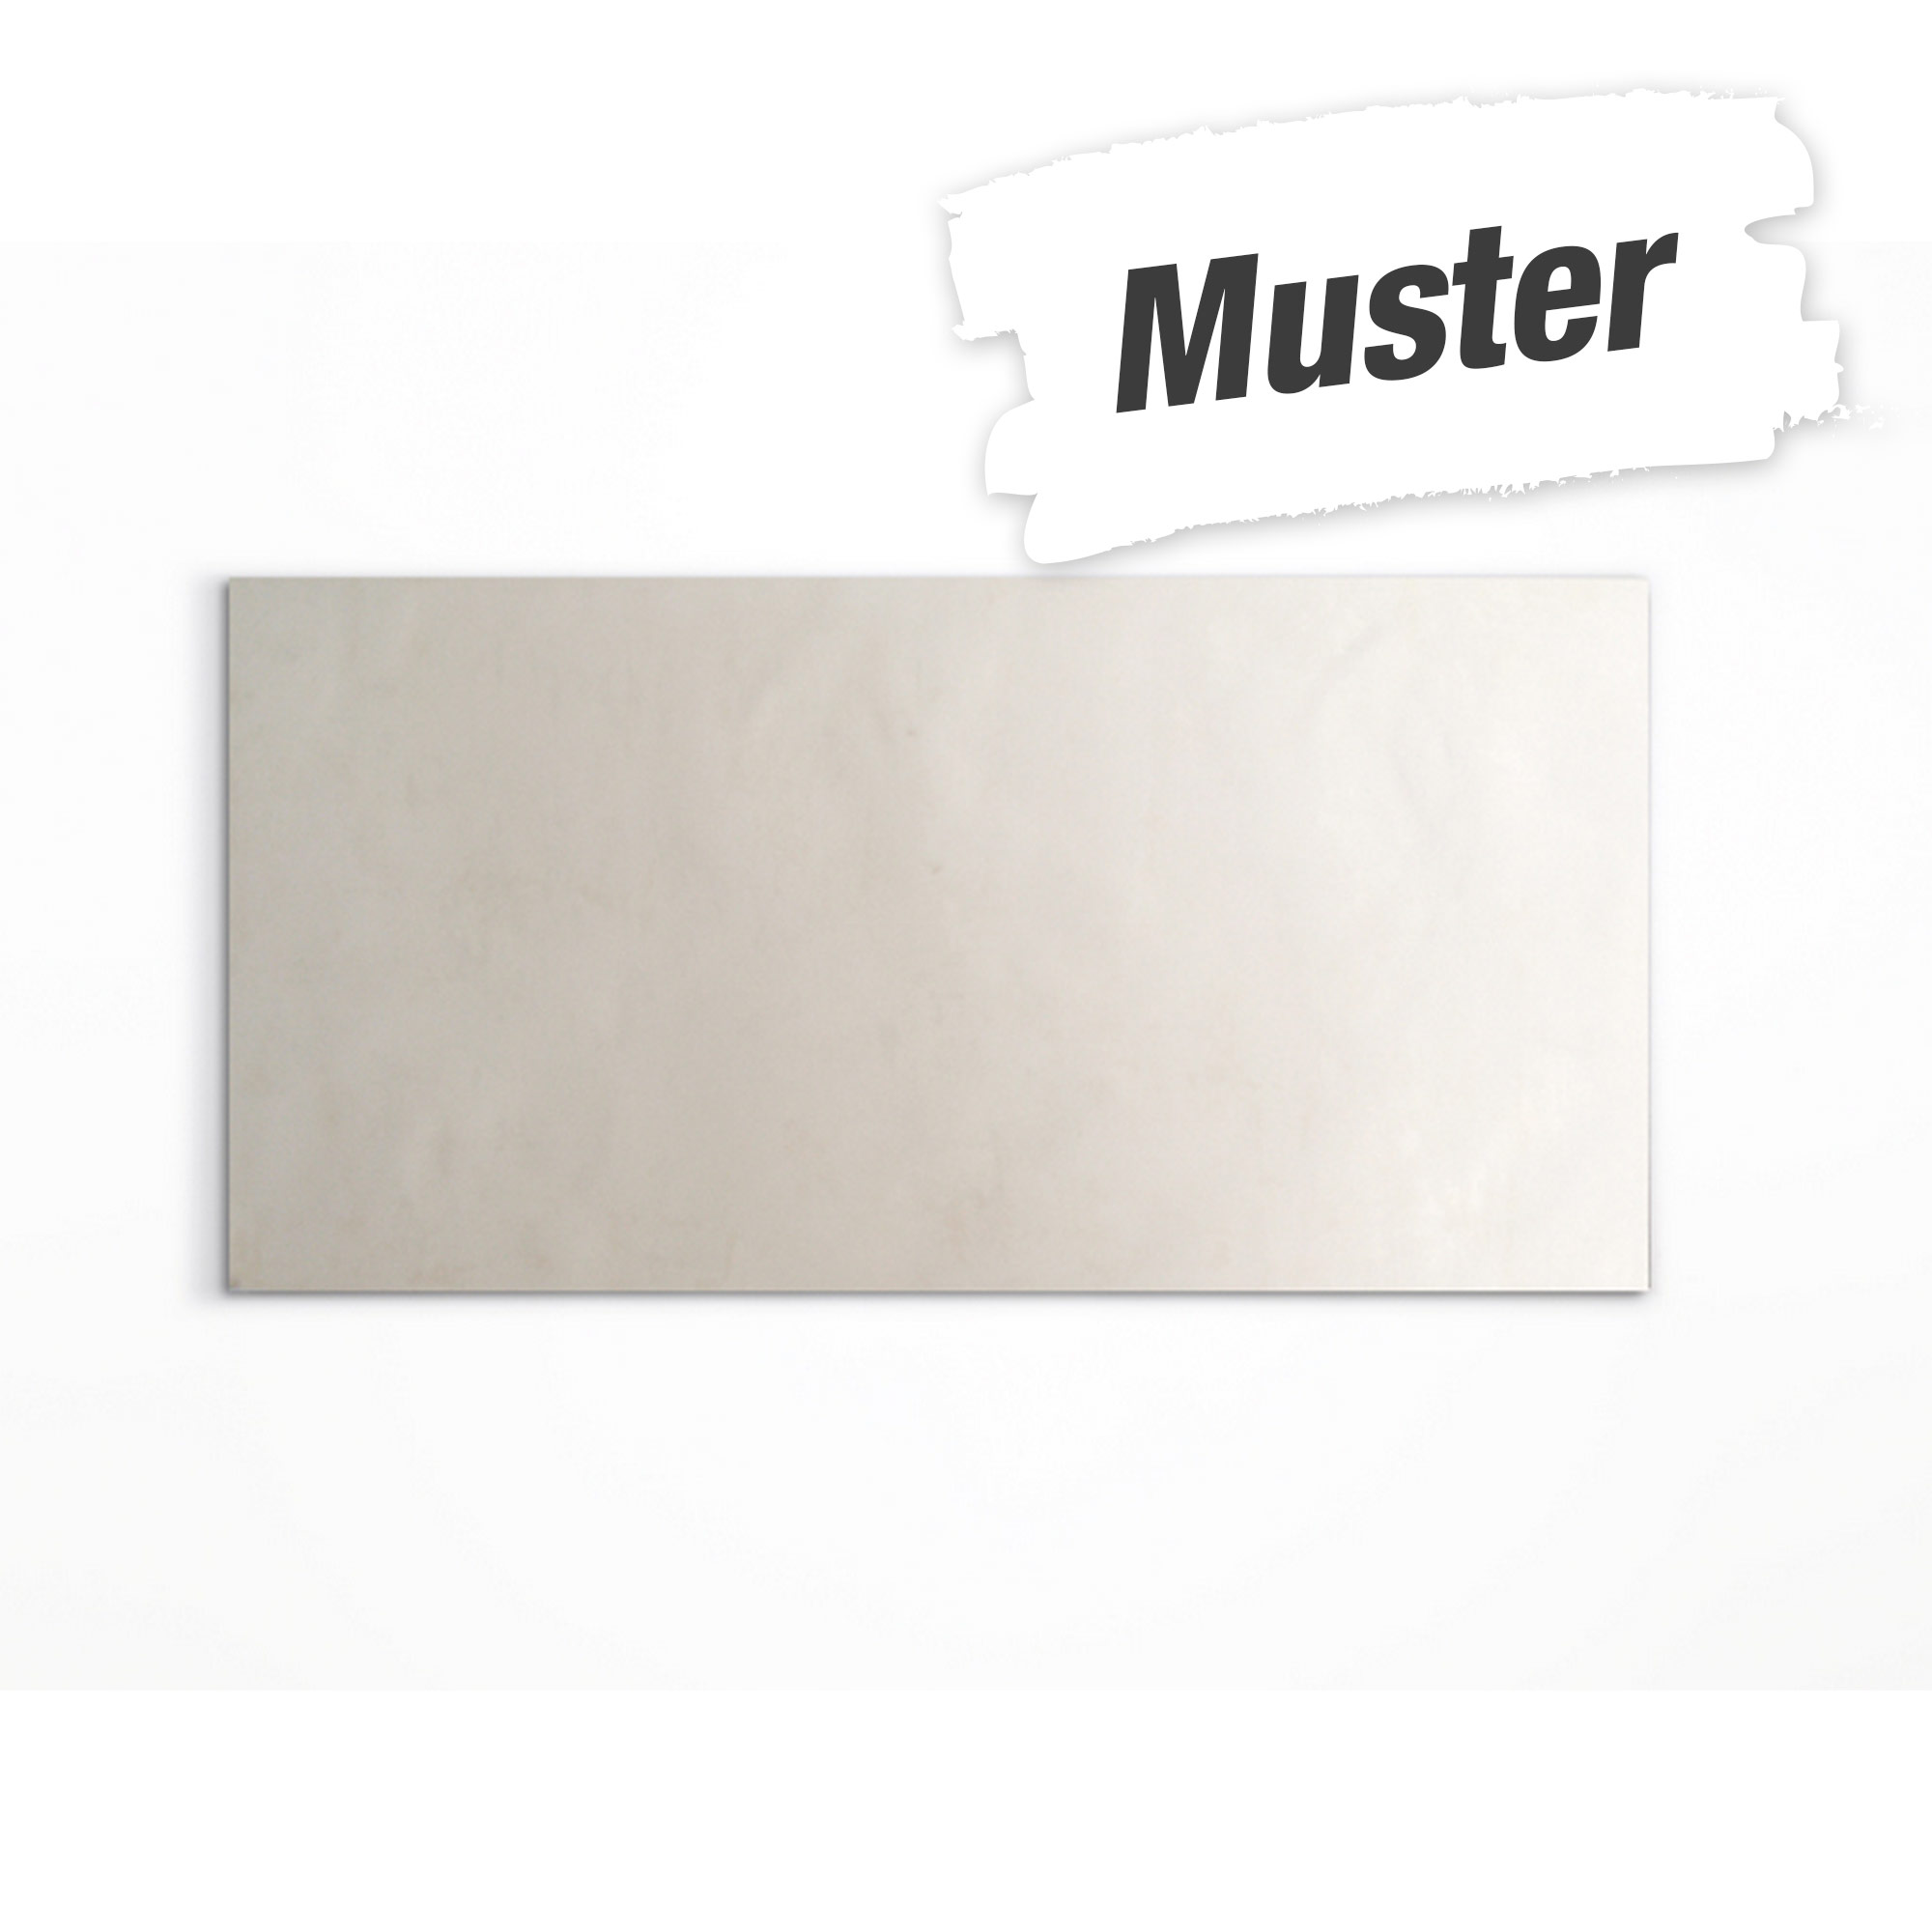 Muster zur Wandfliese 'Melina' Steingut hellcreme 30 x 60 cm + product picture